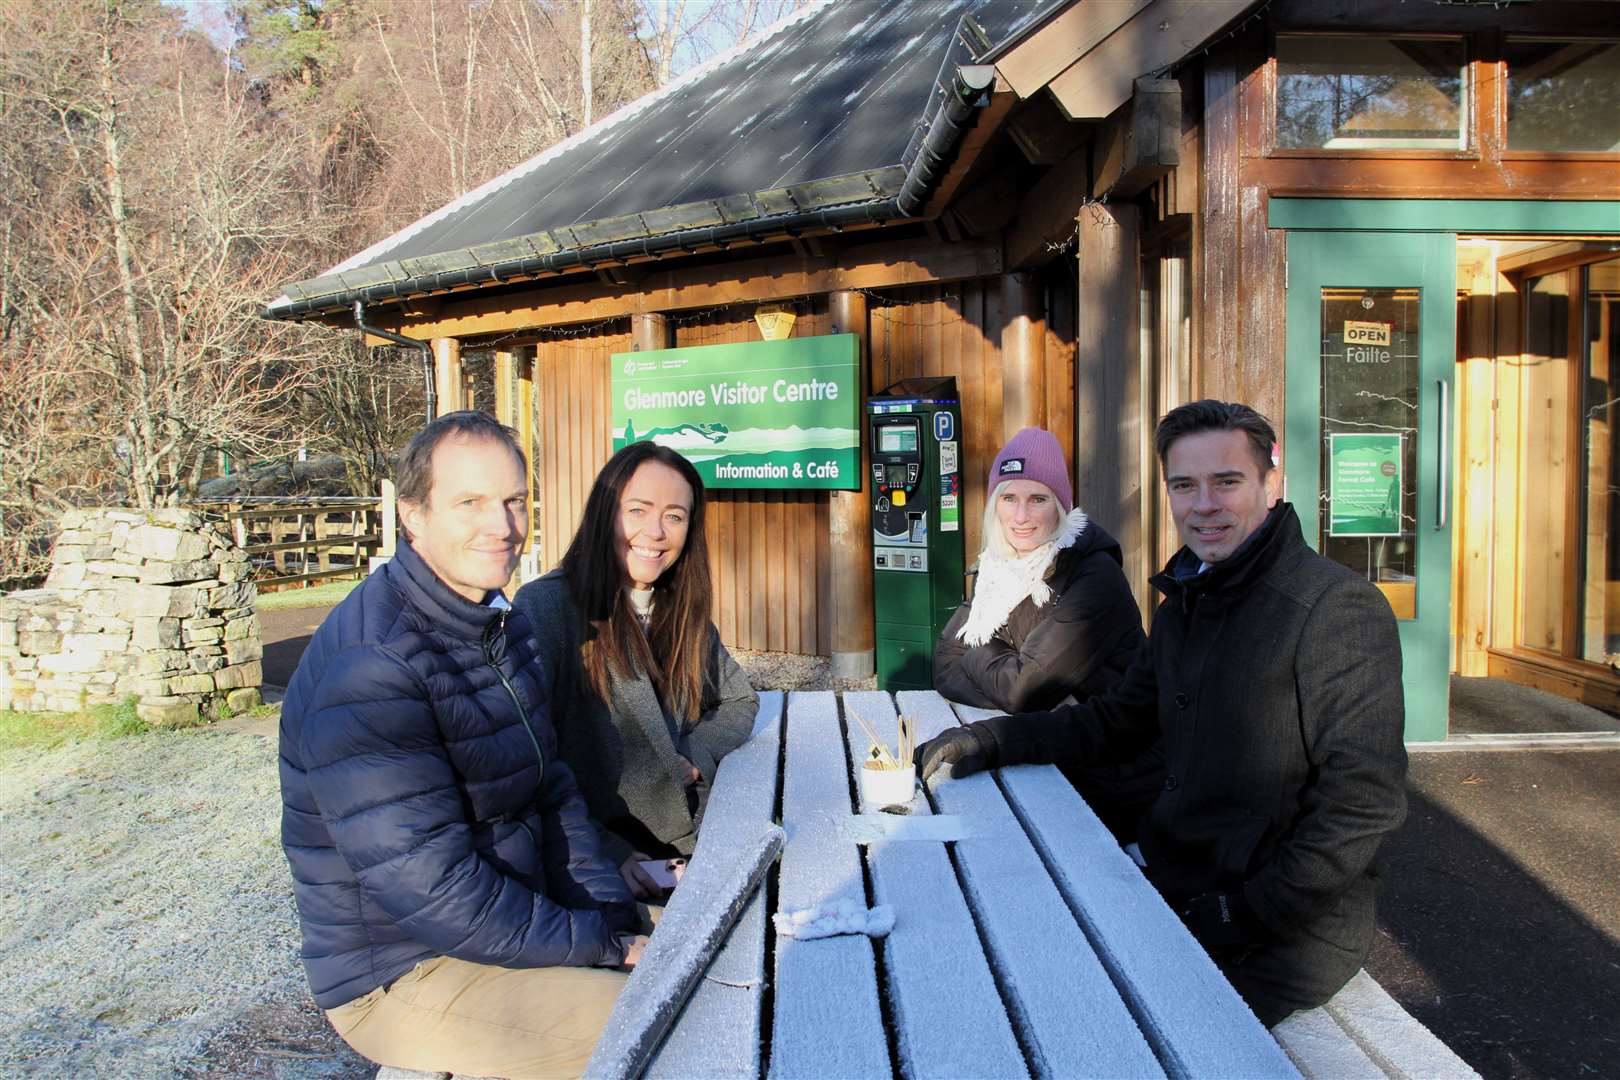 ACGT board members Mike Dearman, Lee Bissett, Kirsy Bruce and Duncan Swarbrick at Glenmore Visitor Centre